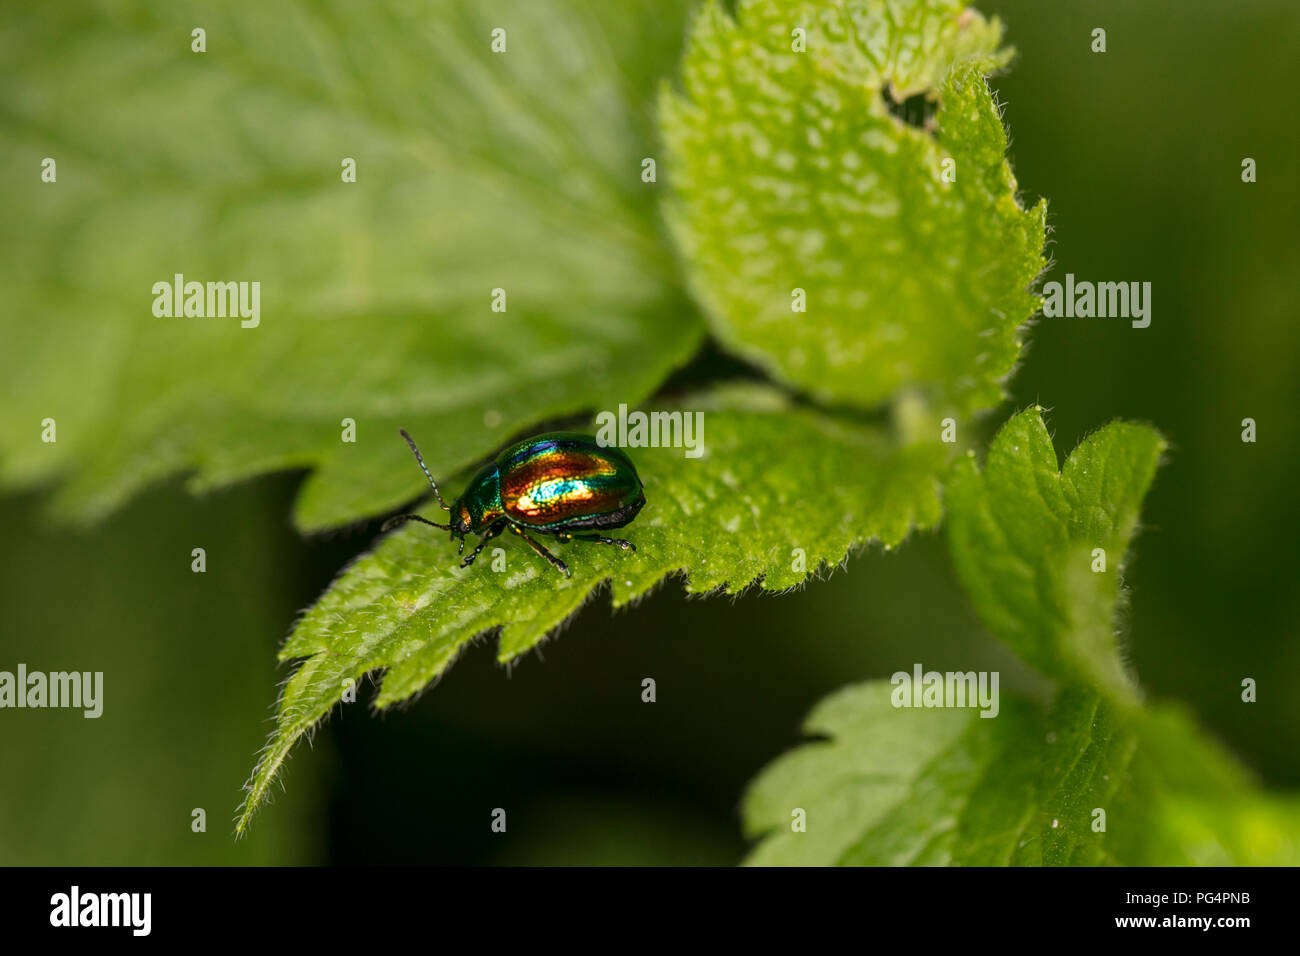 Chrysolina fastuosa, colorful beetle wanders on a green leaf Stock Photo